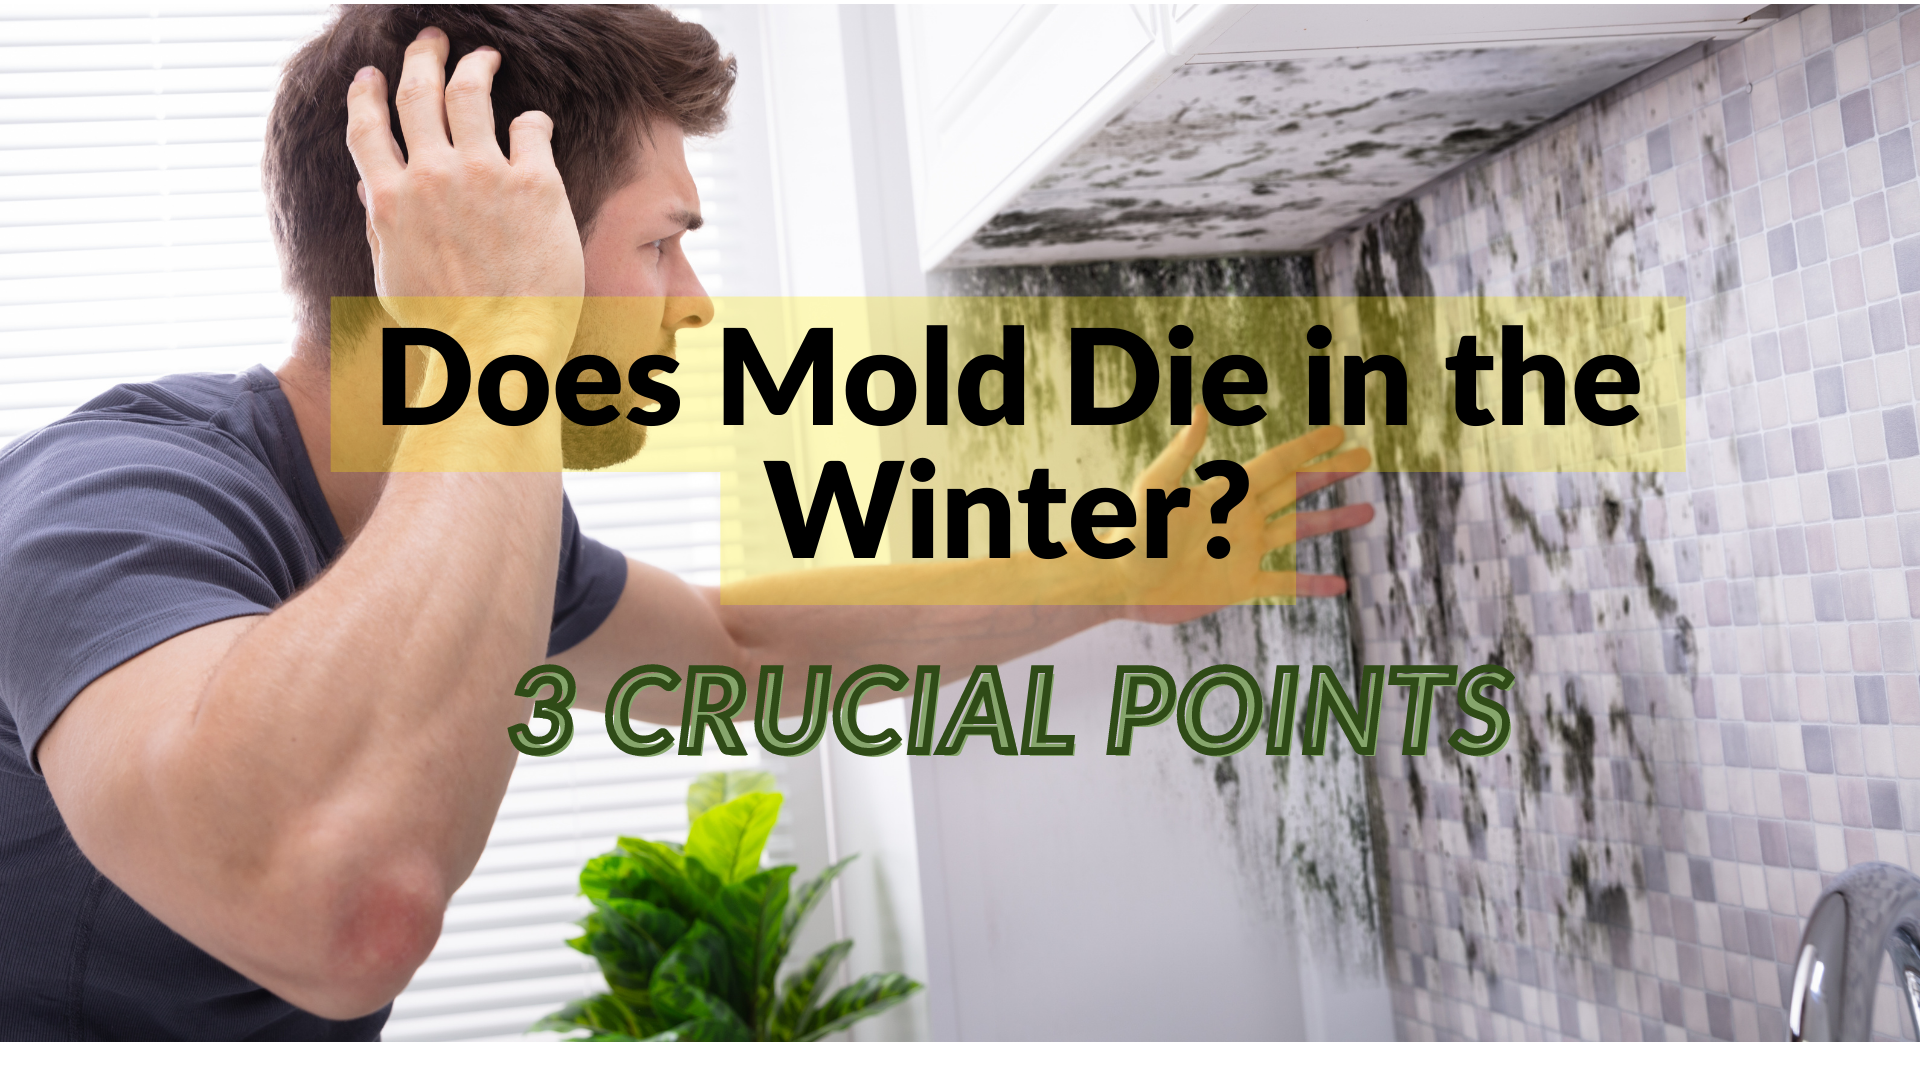 Does Mold Die in the Winter